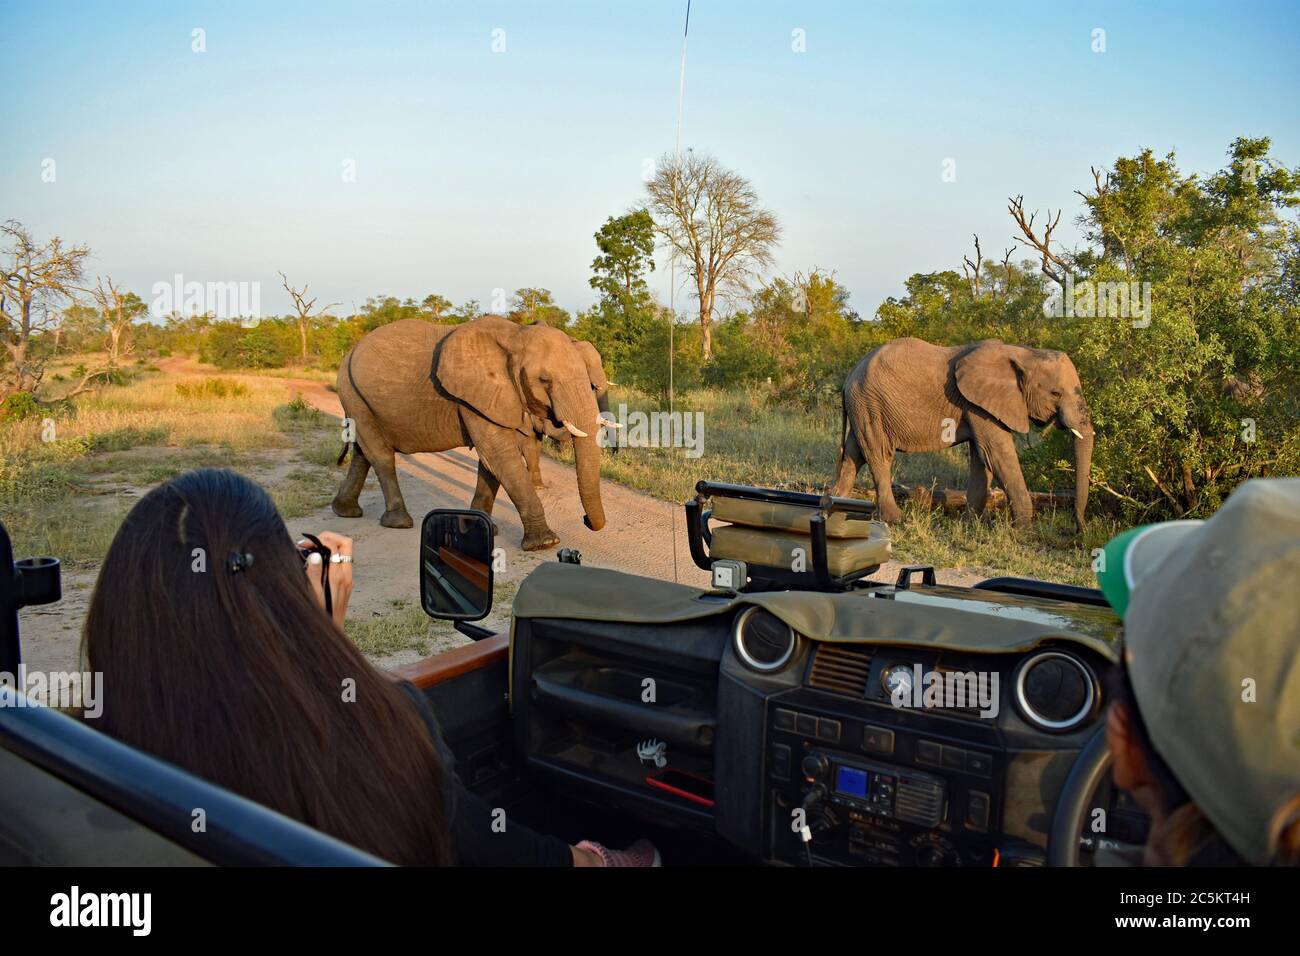 An Elephant (Loxodonta) herd walks past a safari vehicle with a girl taking photos in Sabi Sands Game Reserve, Greater Kruger, South Africa. Stock Photo